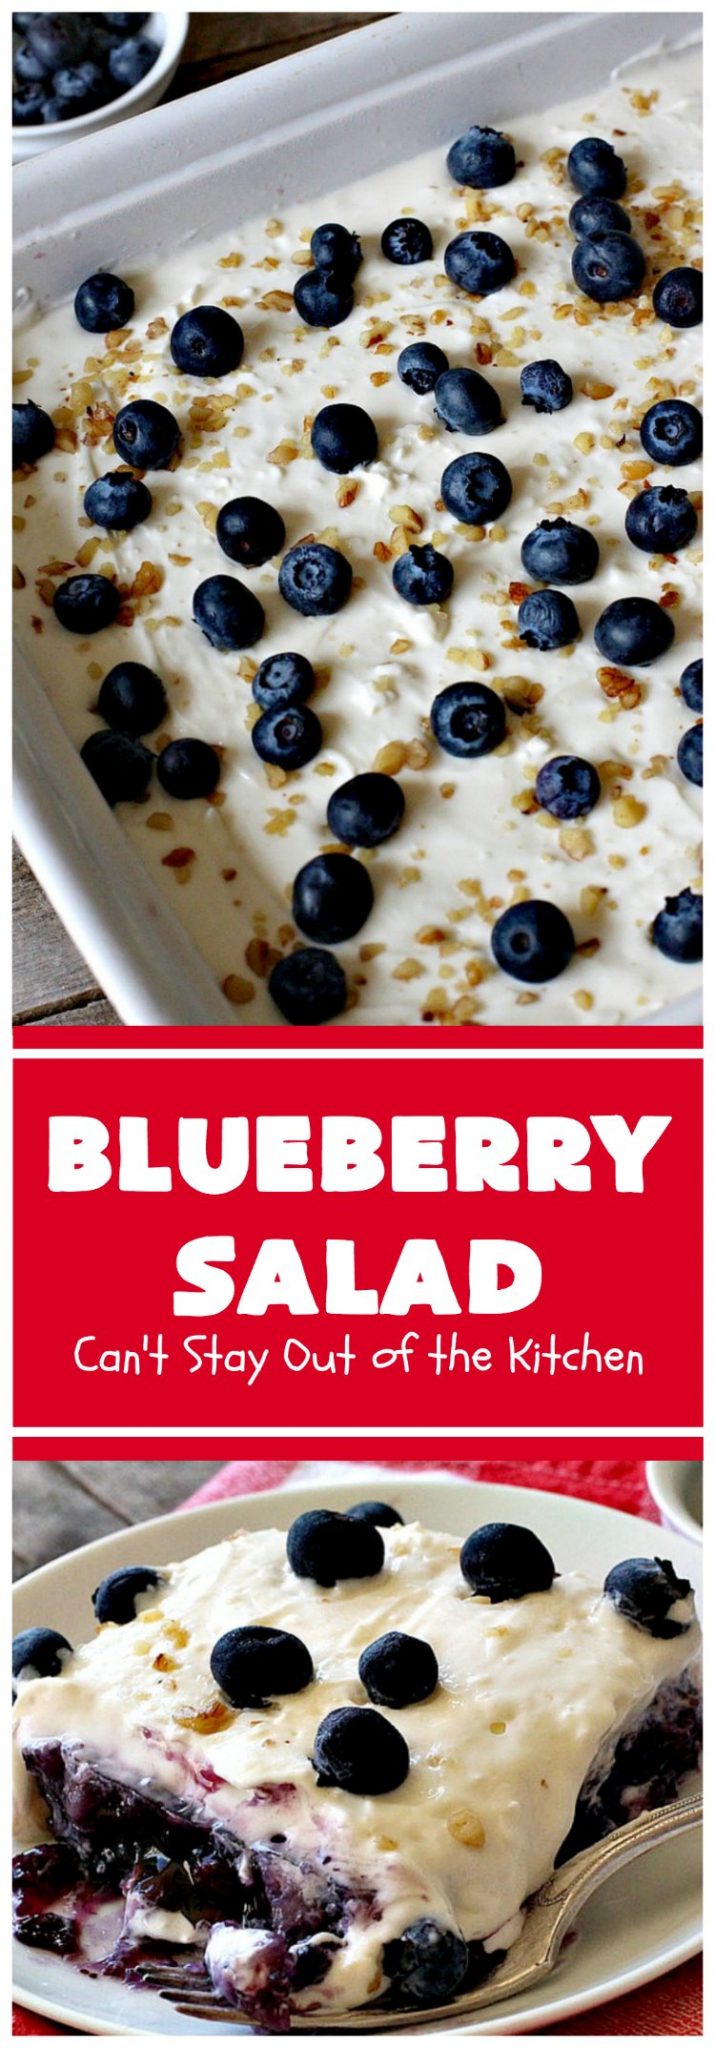 Blueberry Salad – Can't Stay Out of the Kitchen